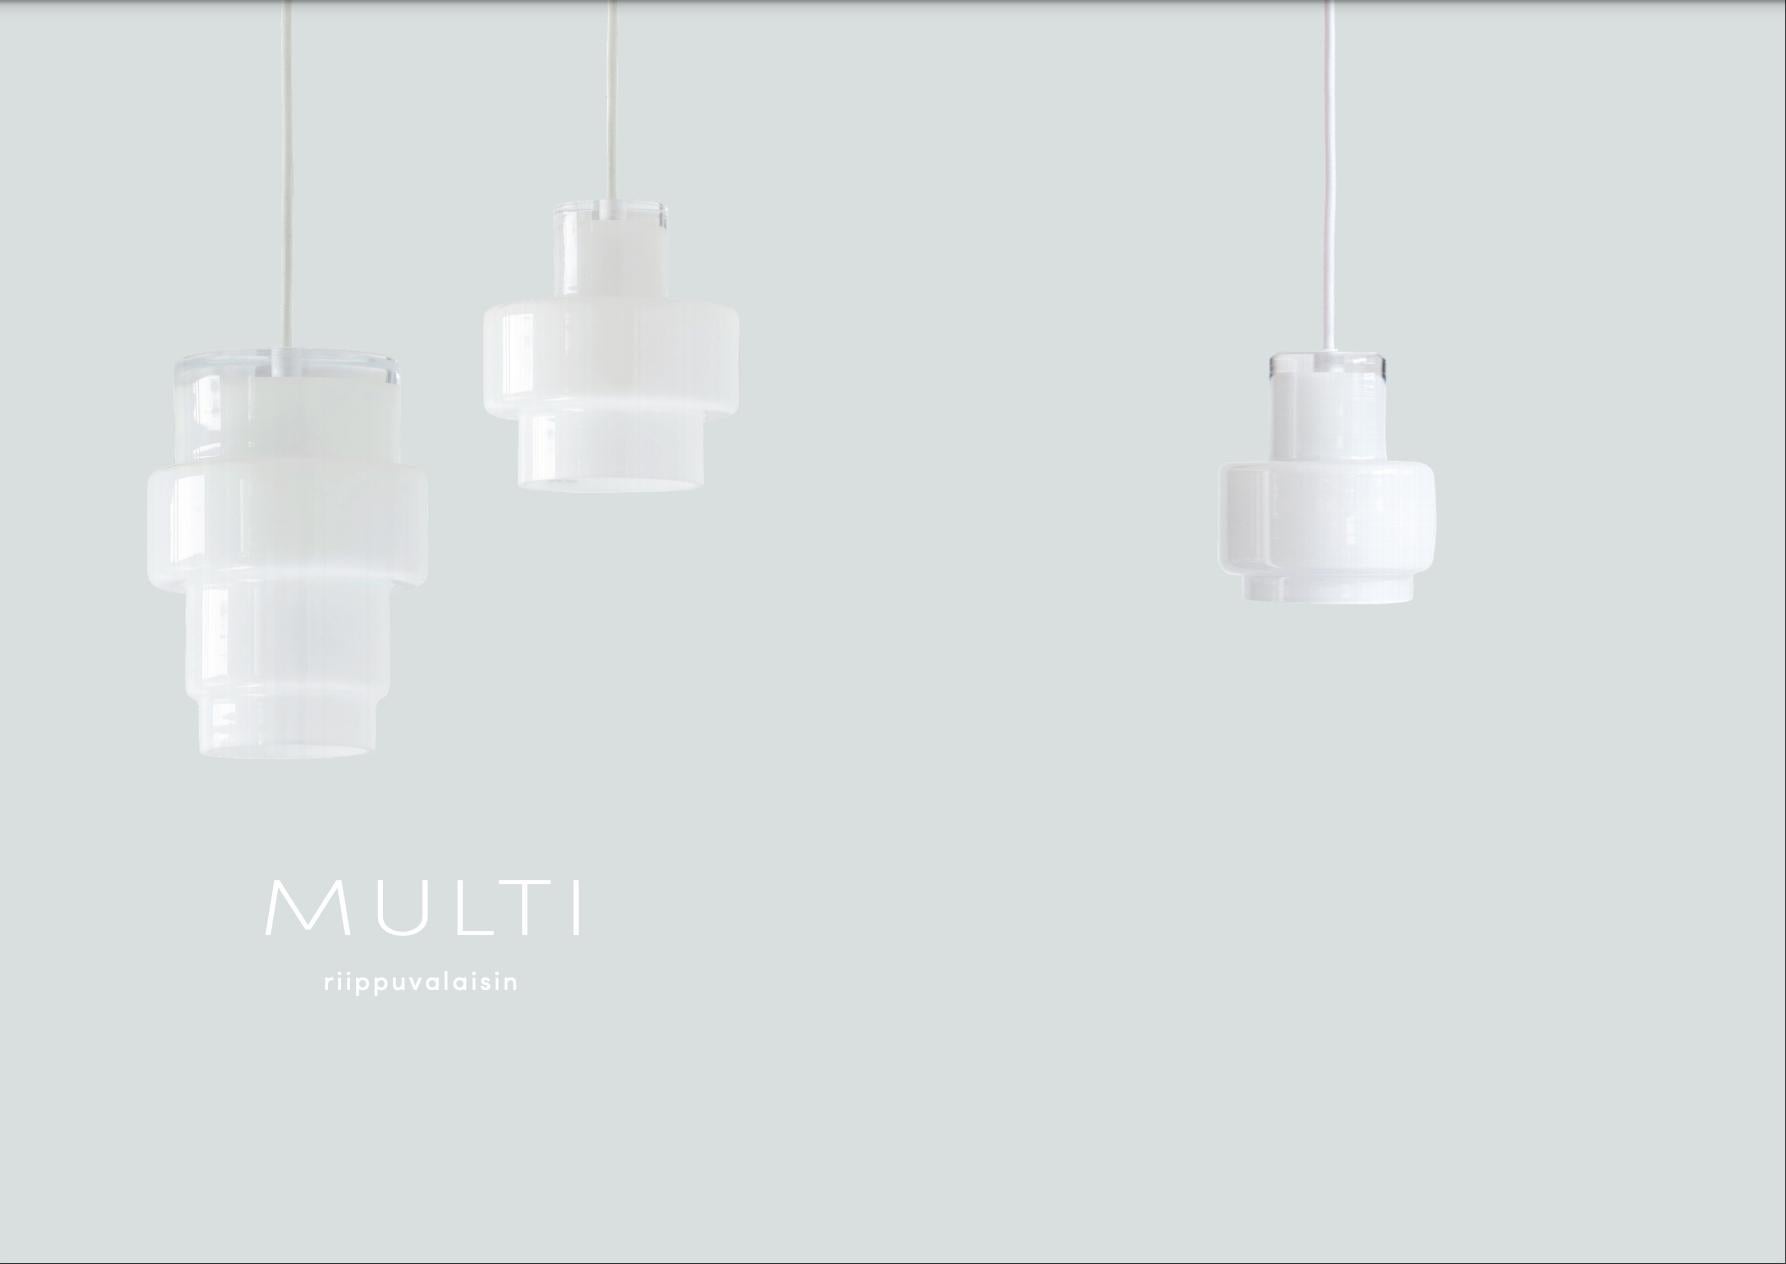 'Multi M' glass pendant by Jokinen and Konu for Innolux. The award winning MULTI glass collection is based on an artistically innovative form of modular glass blowing mold developed by the internationally acclaimed Finnish design team of Jukka